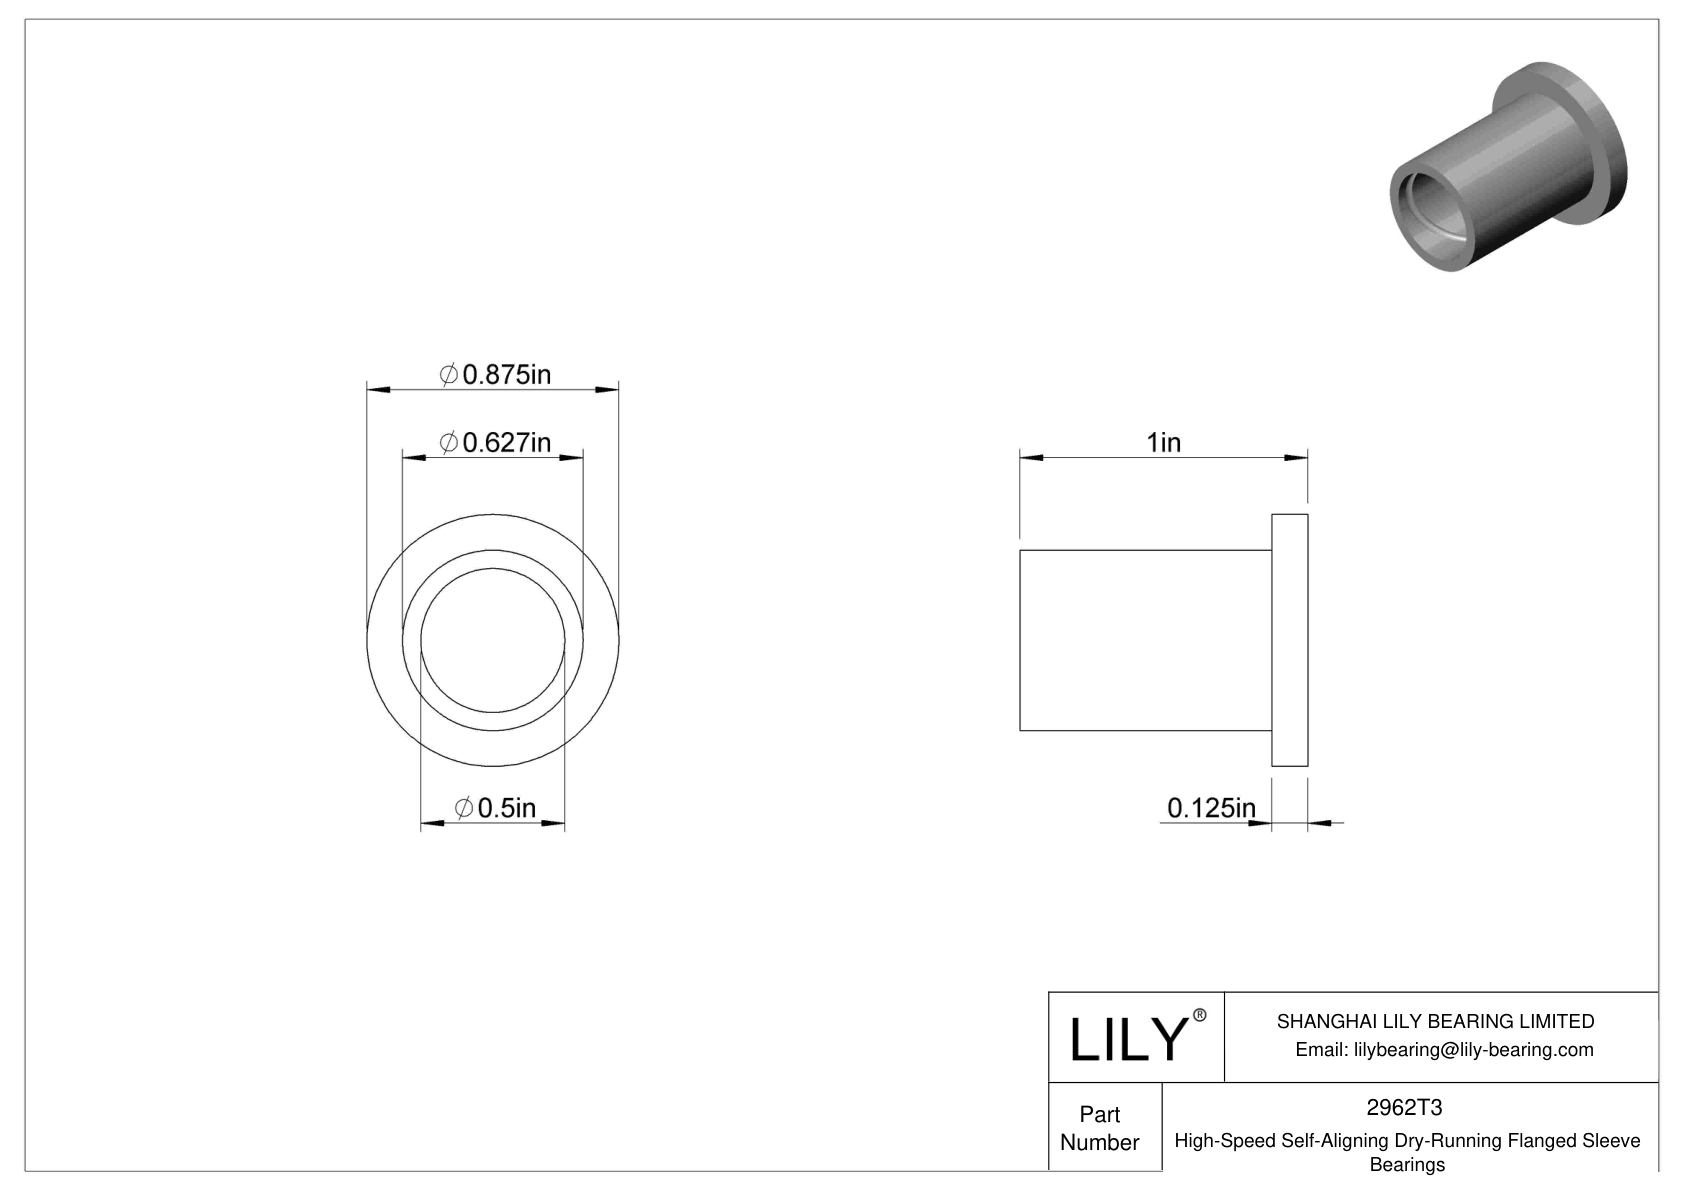 CJGCTD High-Temperature Dry-Running Flanged Sleeve Bearings cad drawing